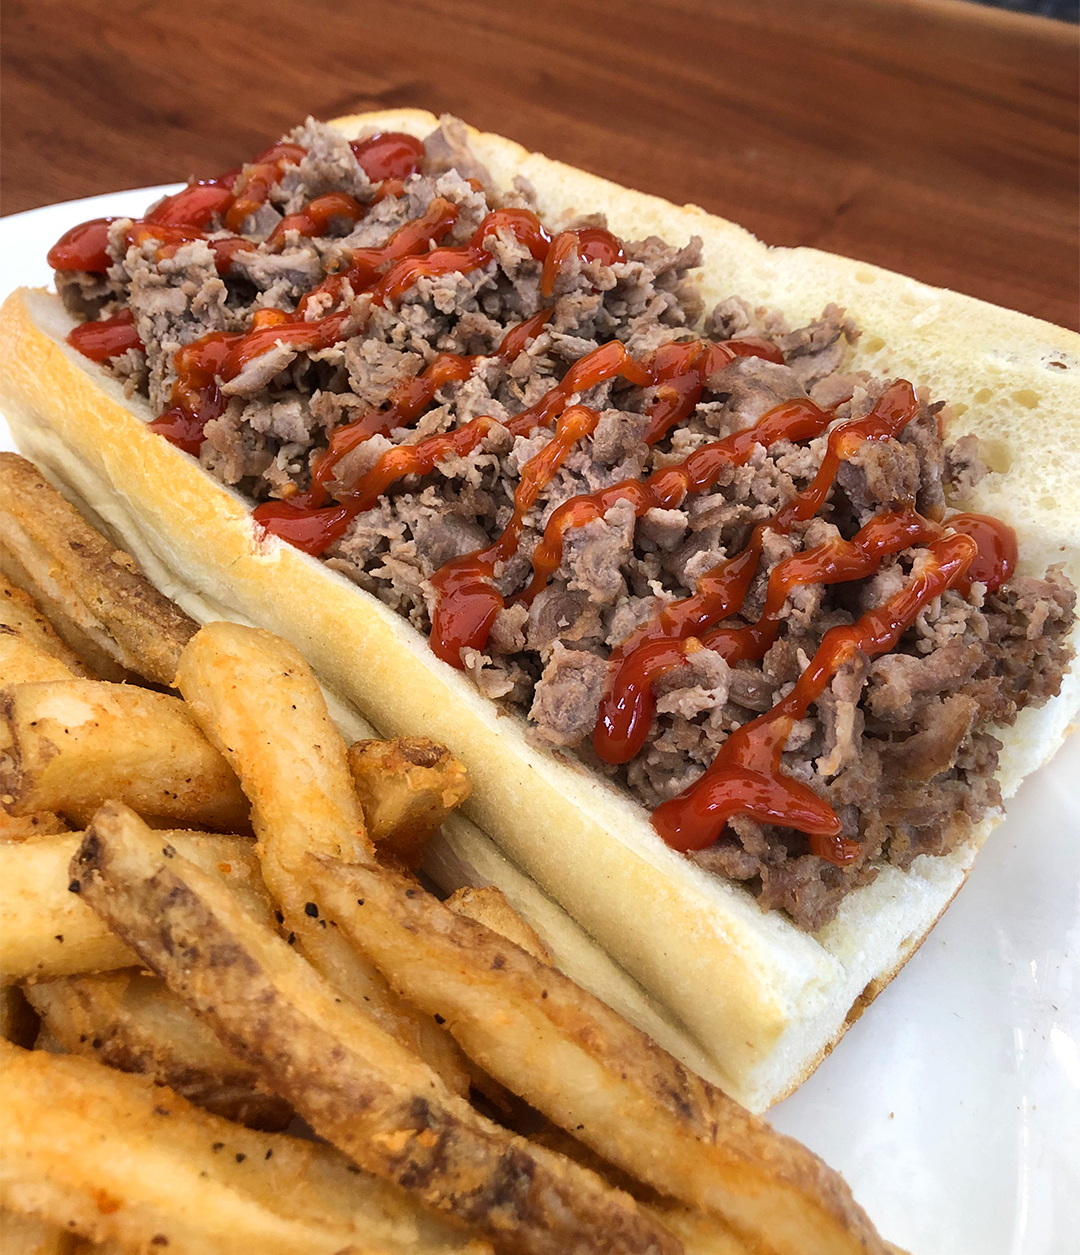 Cheesesteak with ground meet and drizzled with ketchup on a long roll on a white plate next to french fries.